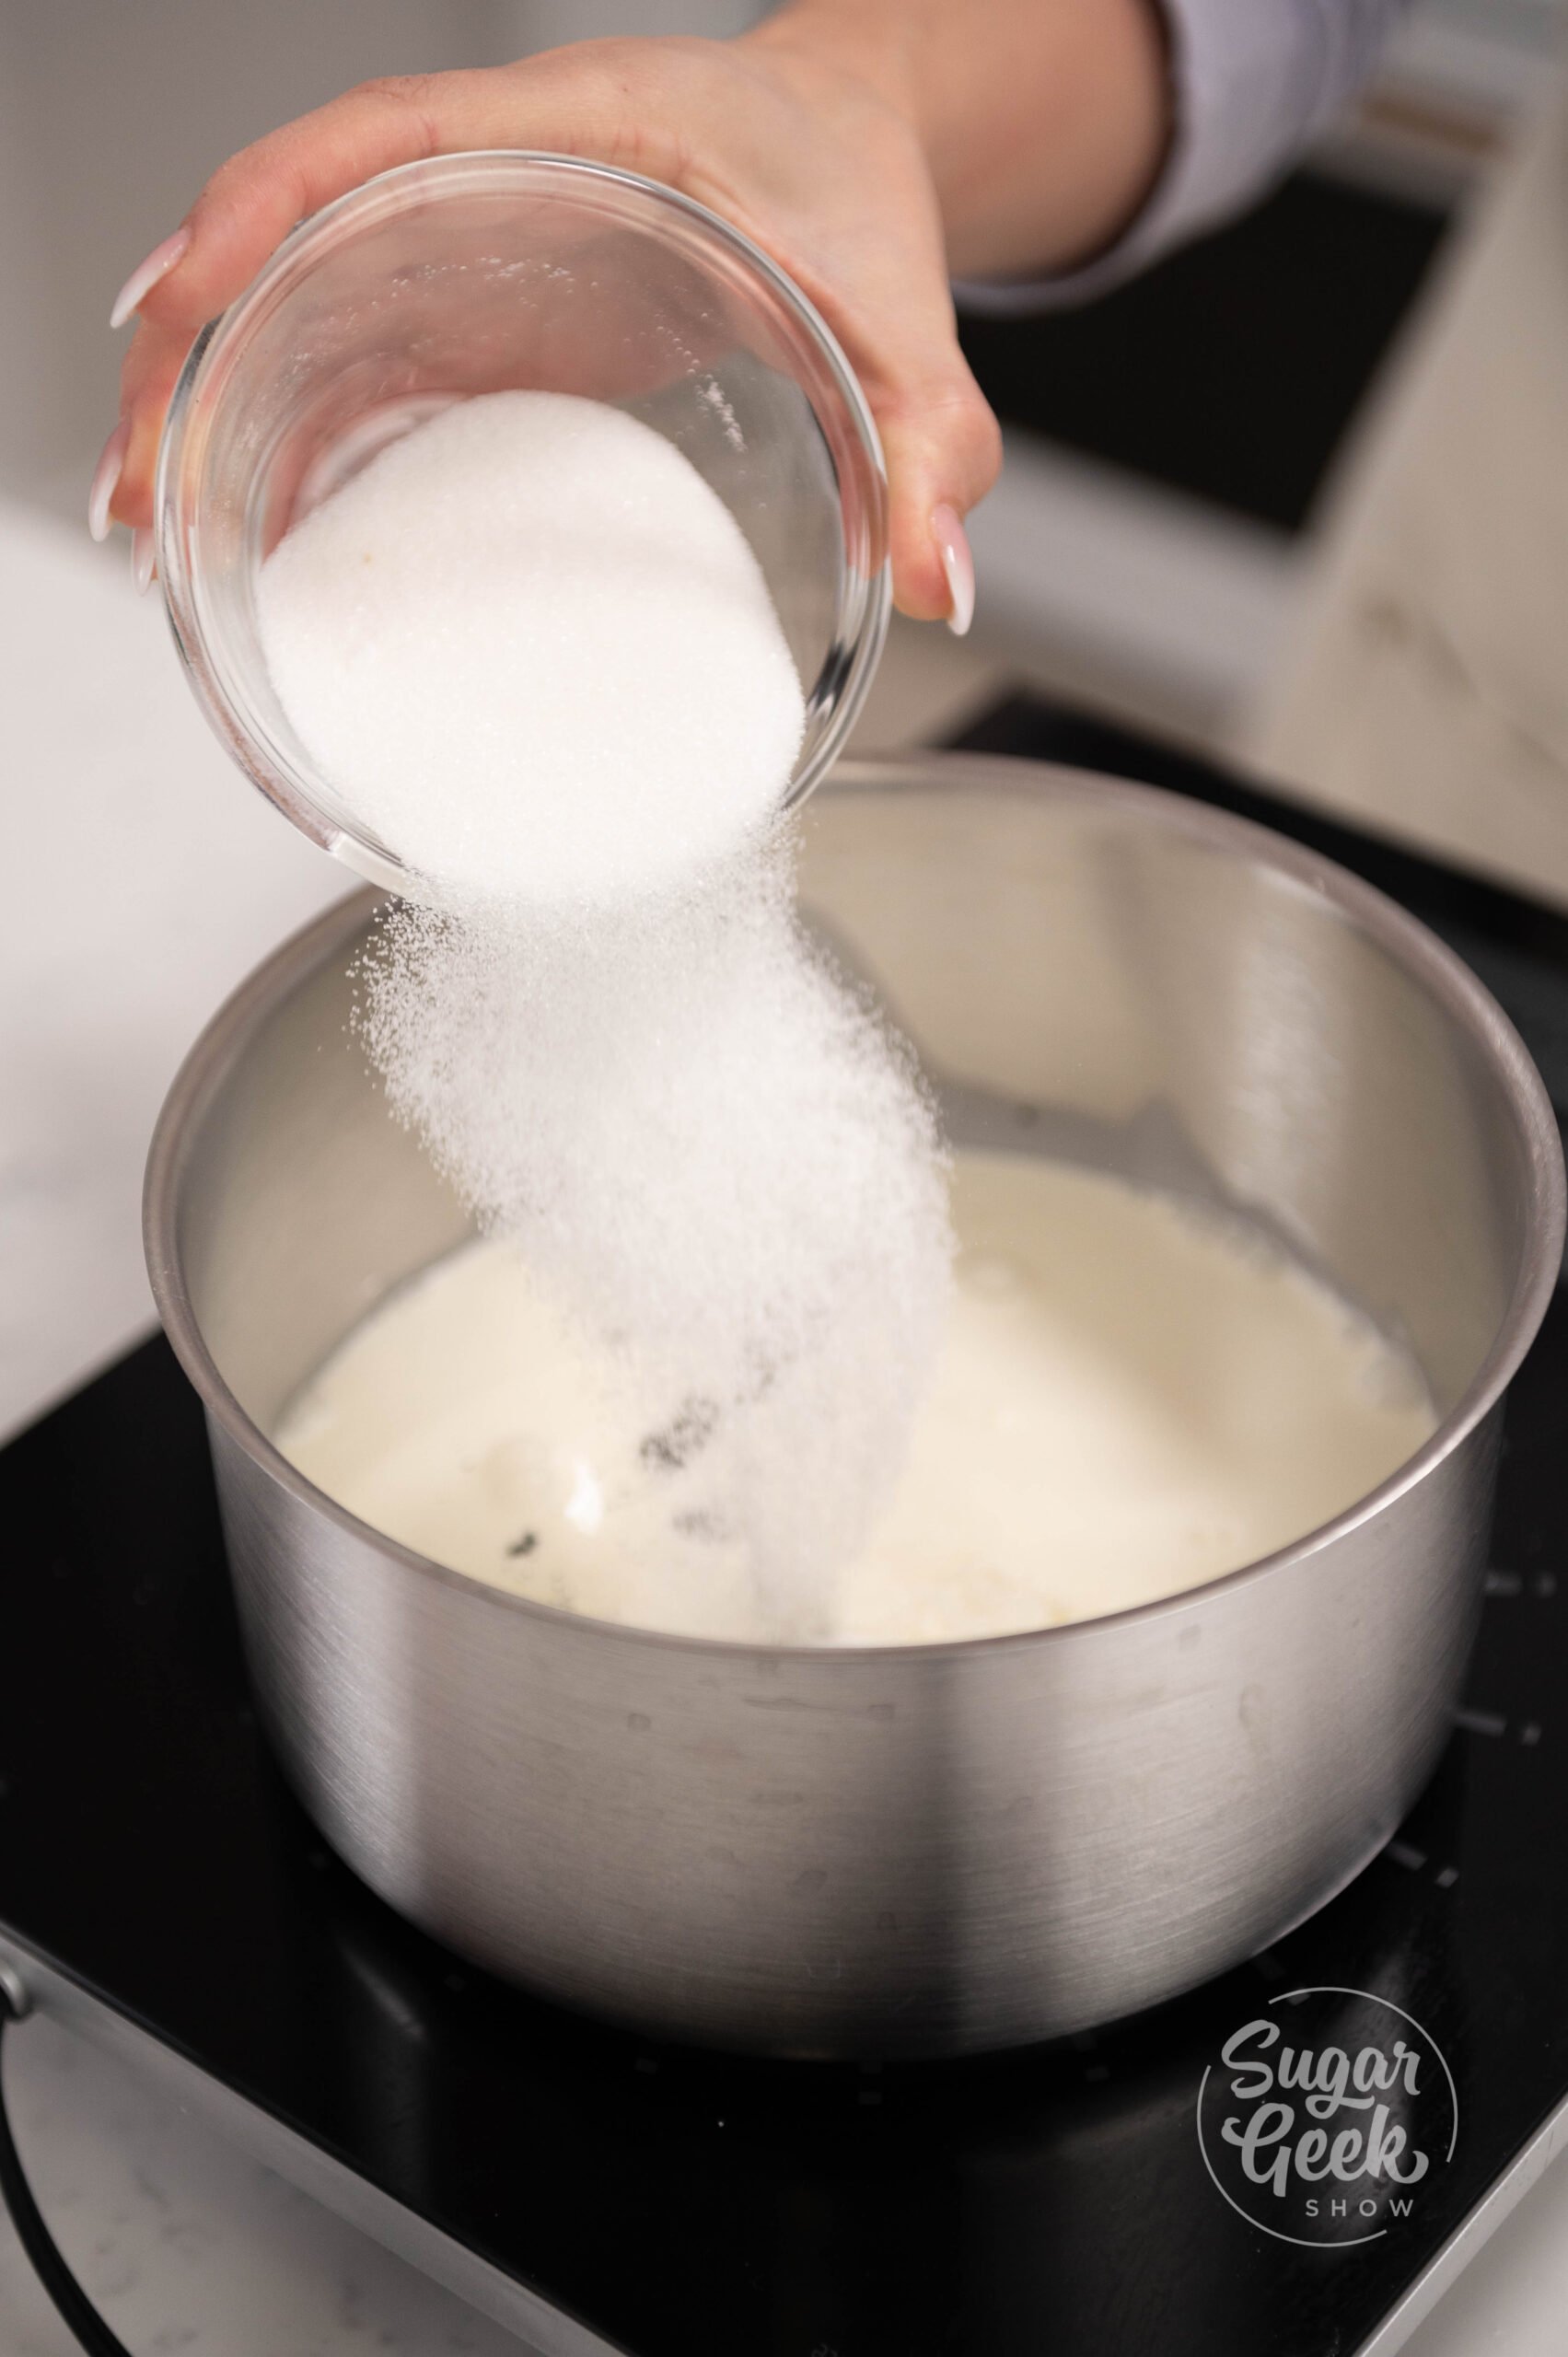 hand pouring bowl of sugar into pot of vanilla and cream